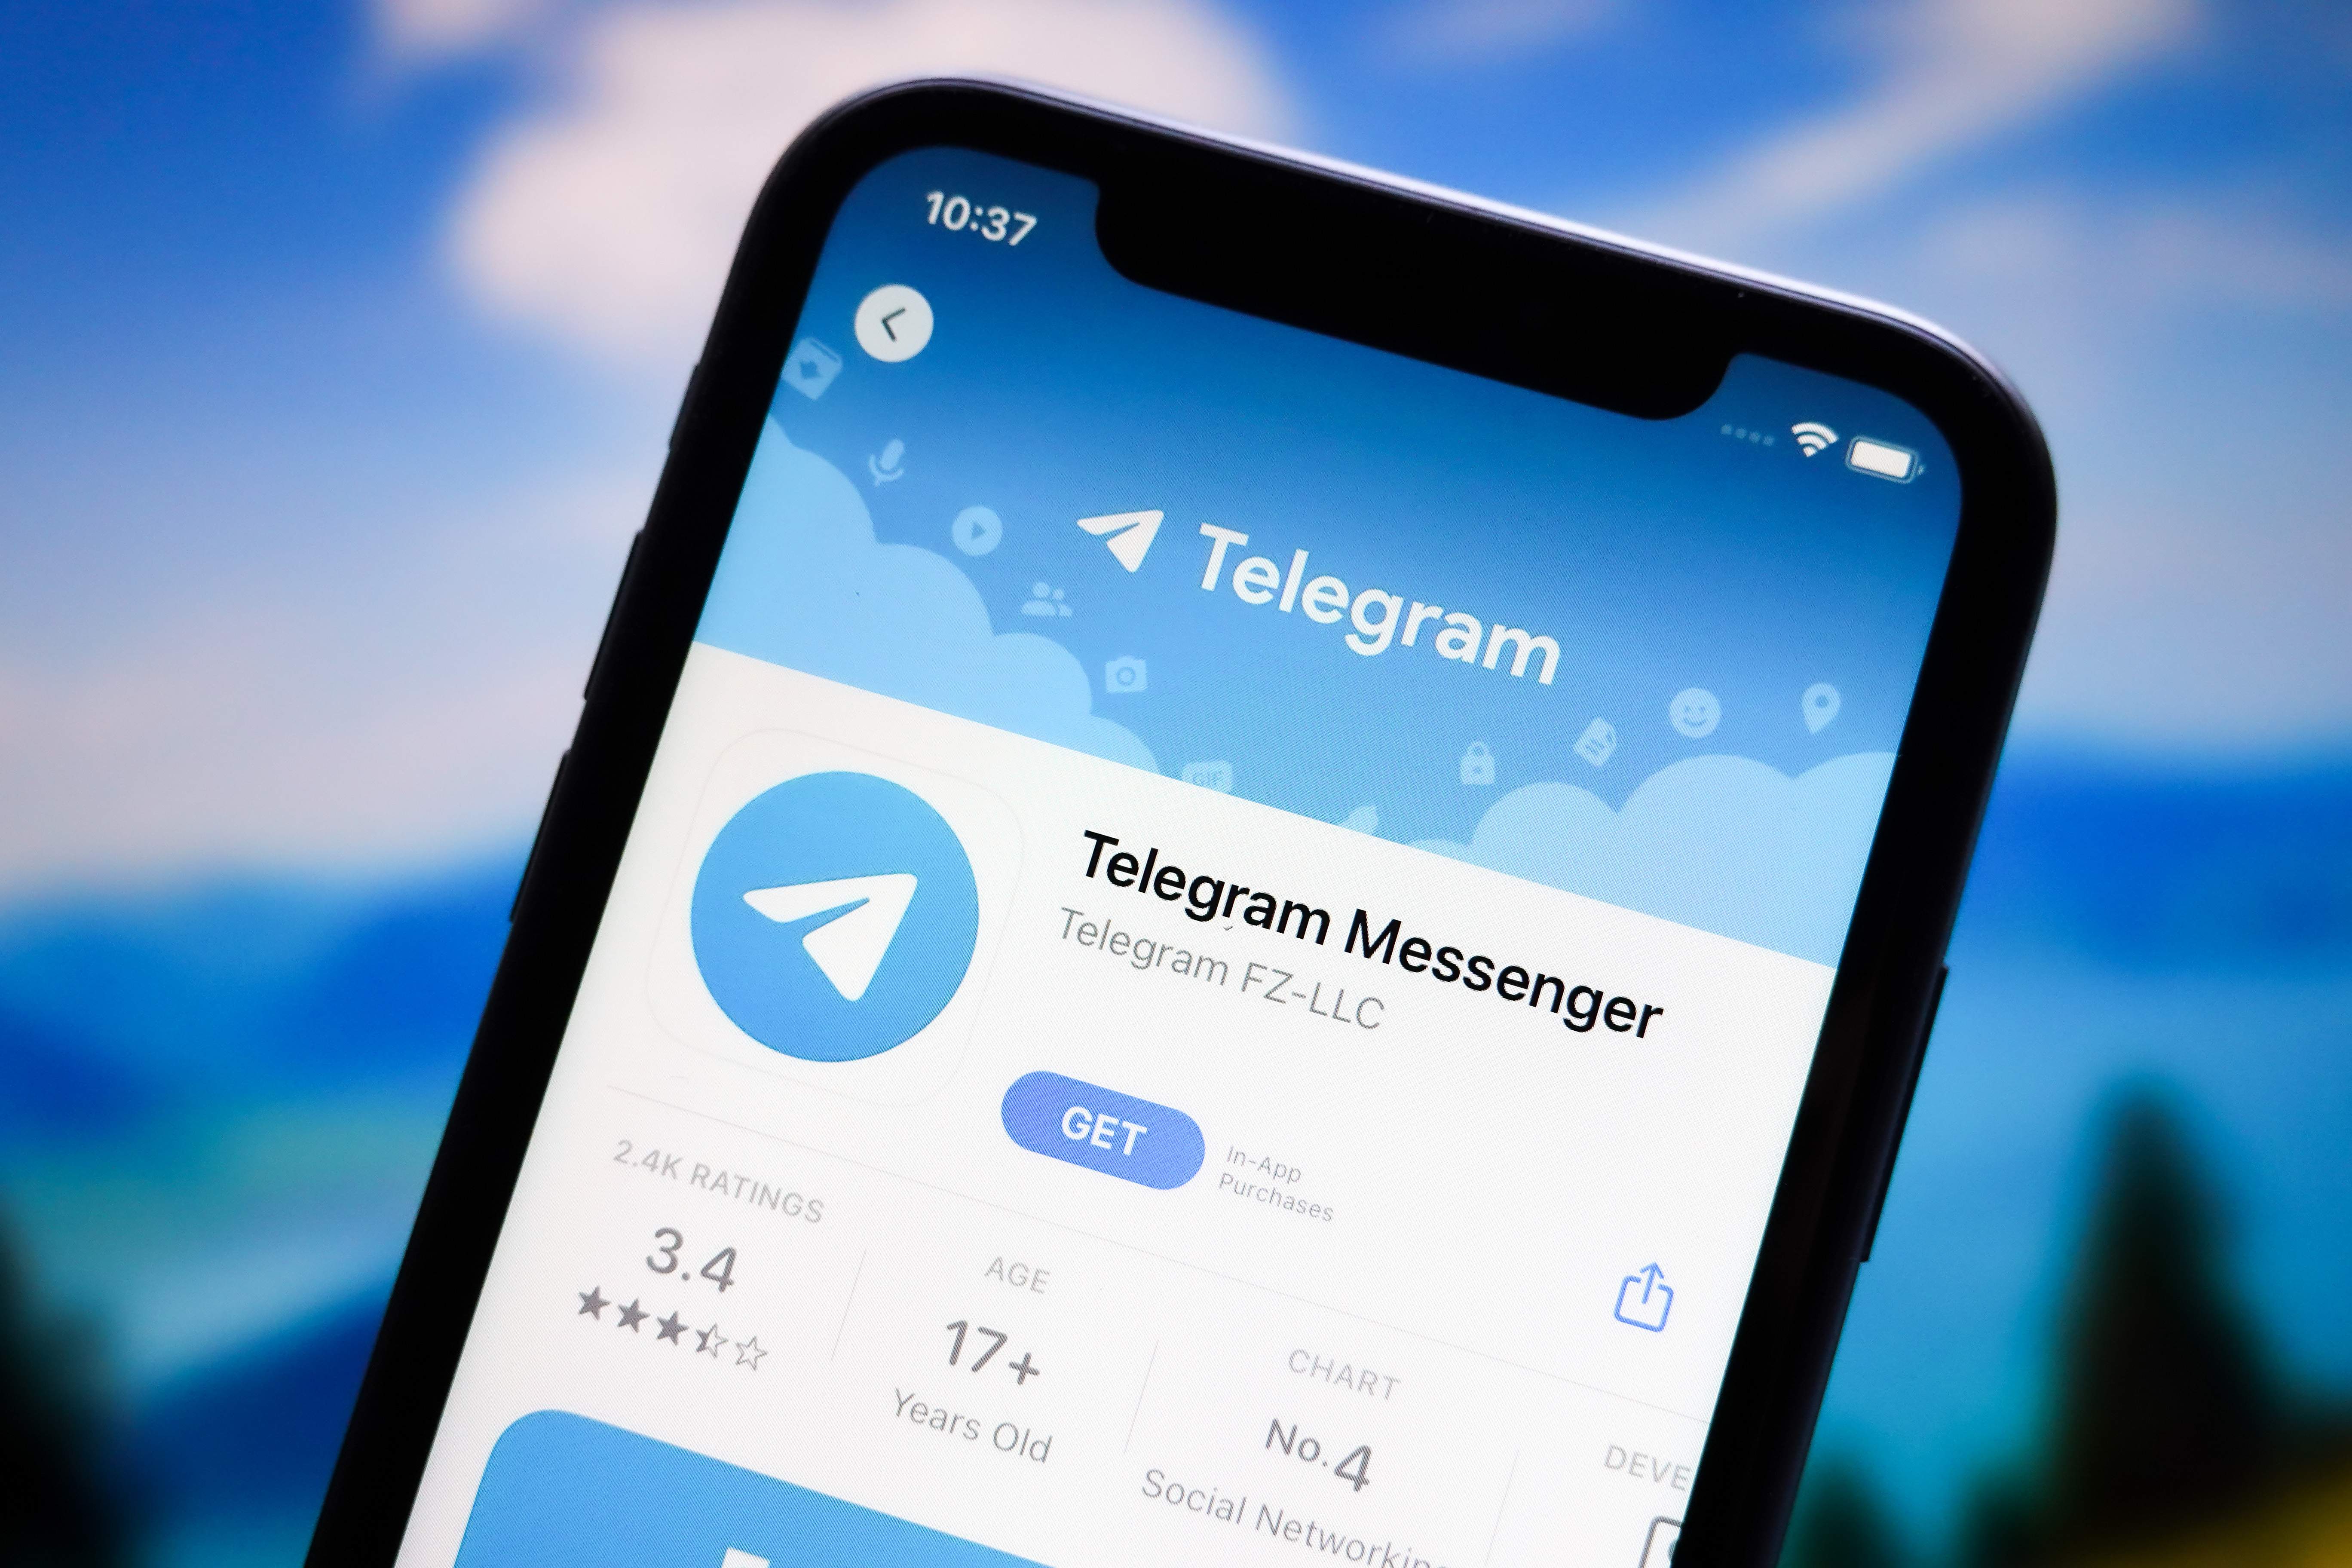 Spanish judge who ordered blocking of Telegram app backs down: "It would be disproportionate"